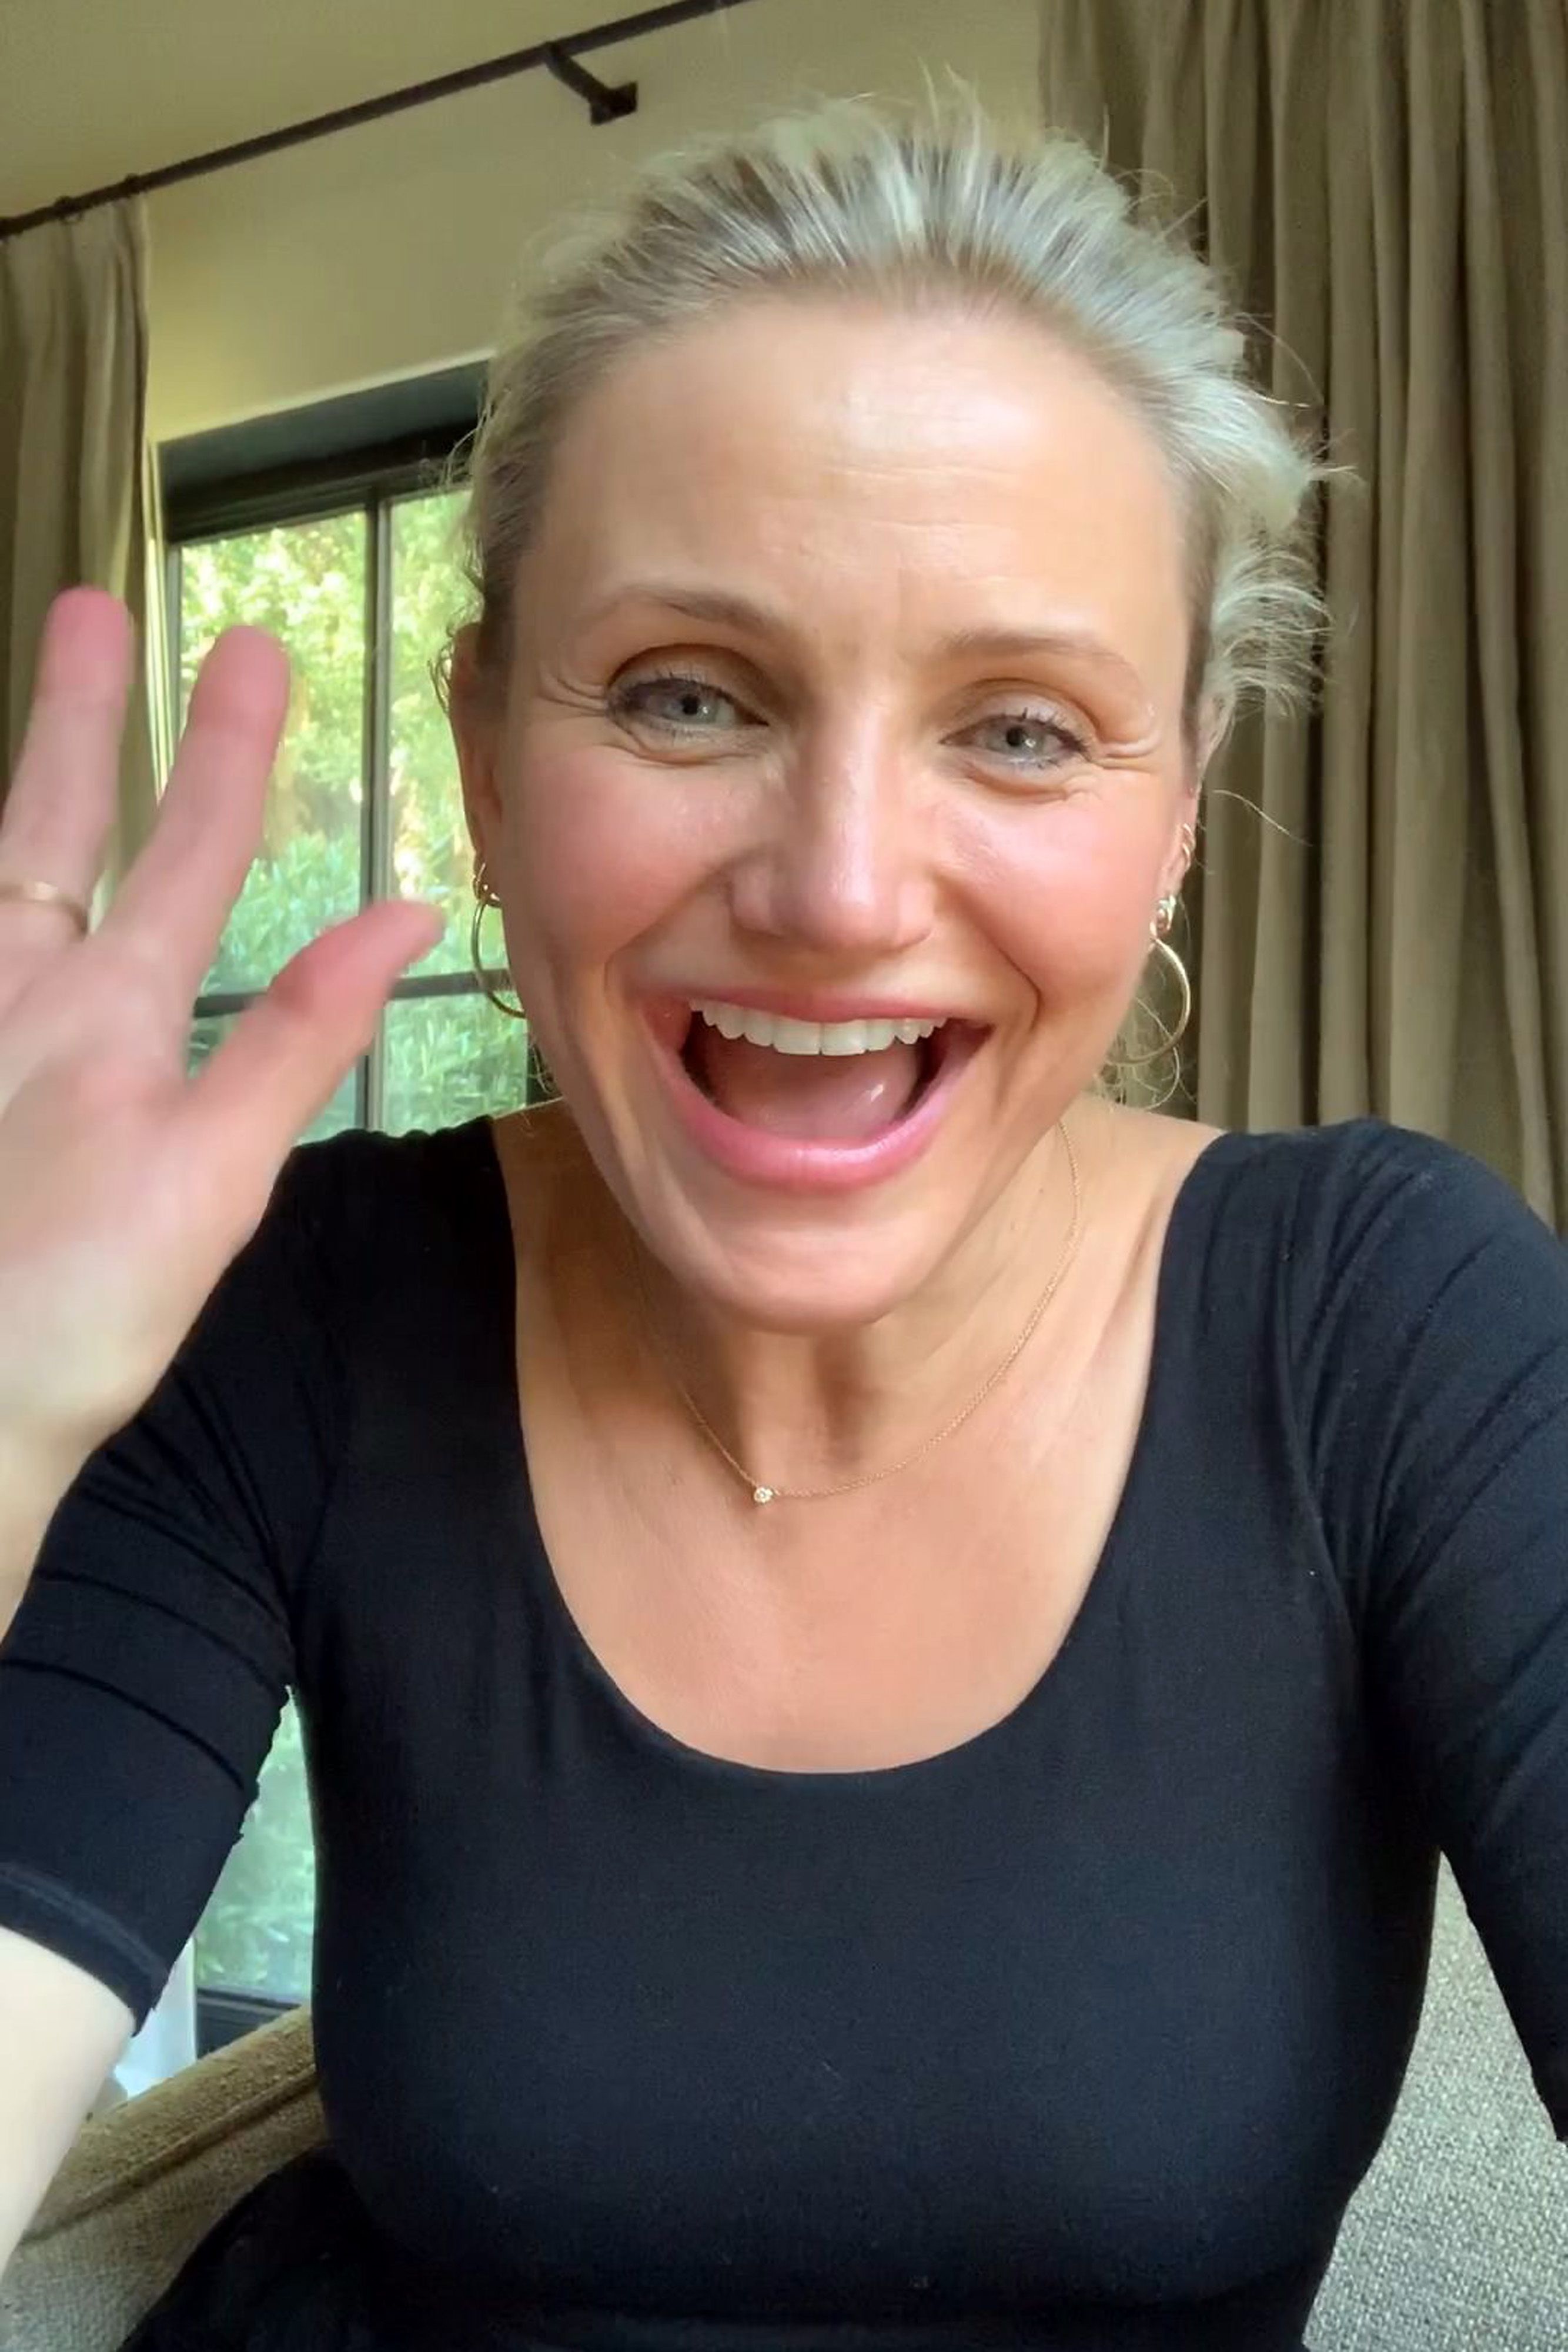 Cameron Diaz in a screengrab while on "RuPaul's Digital DragCon" presented on May 3, 2020 | Source: Getty Images